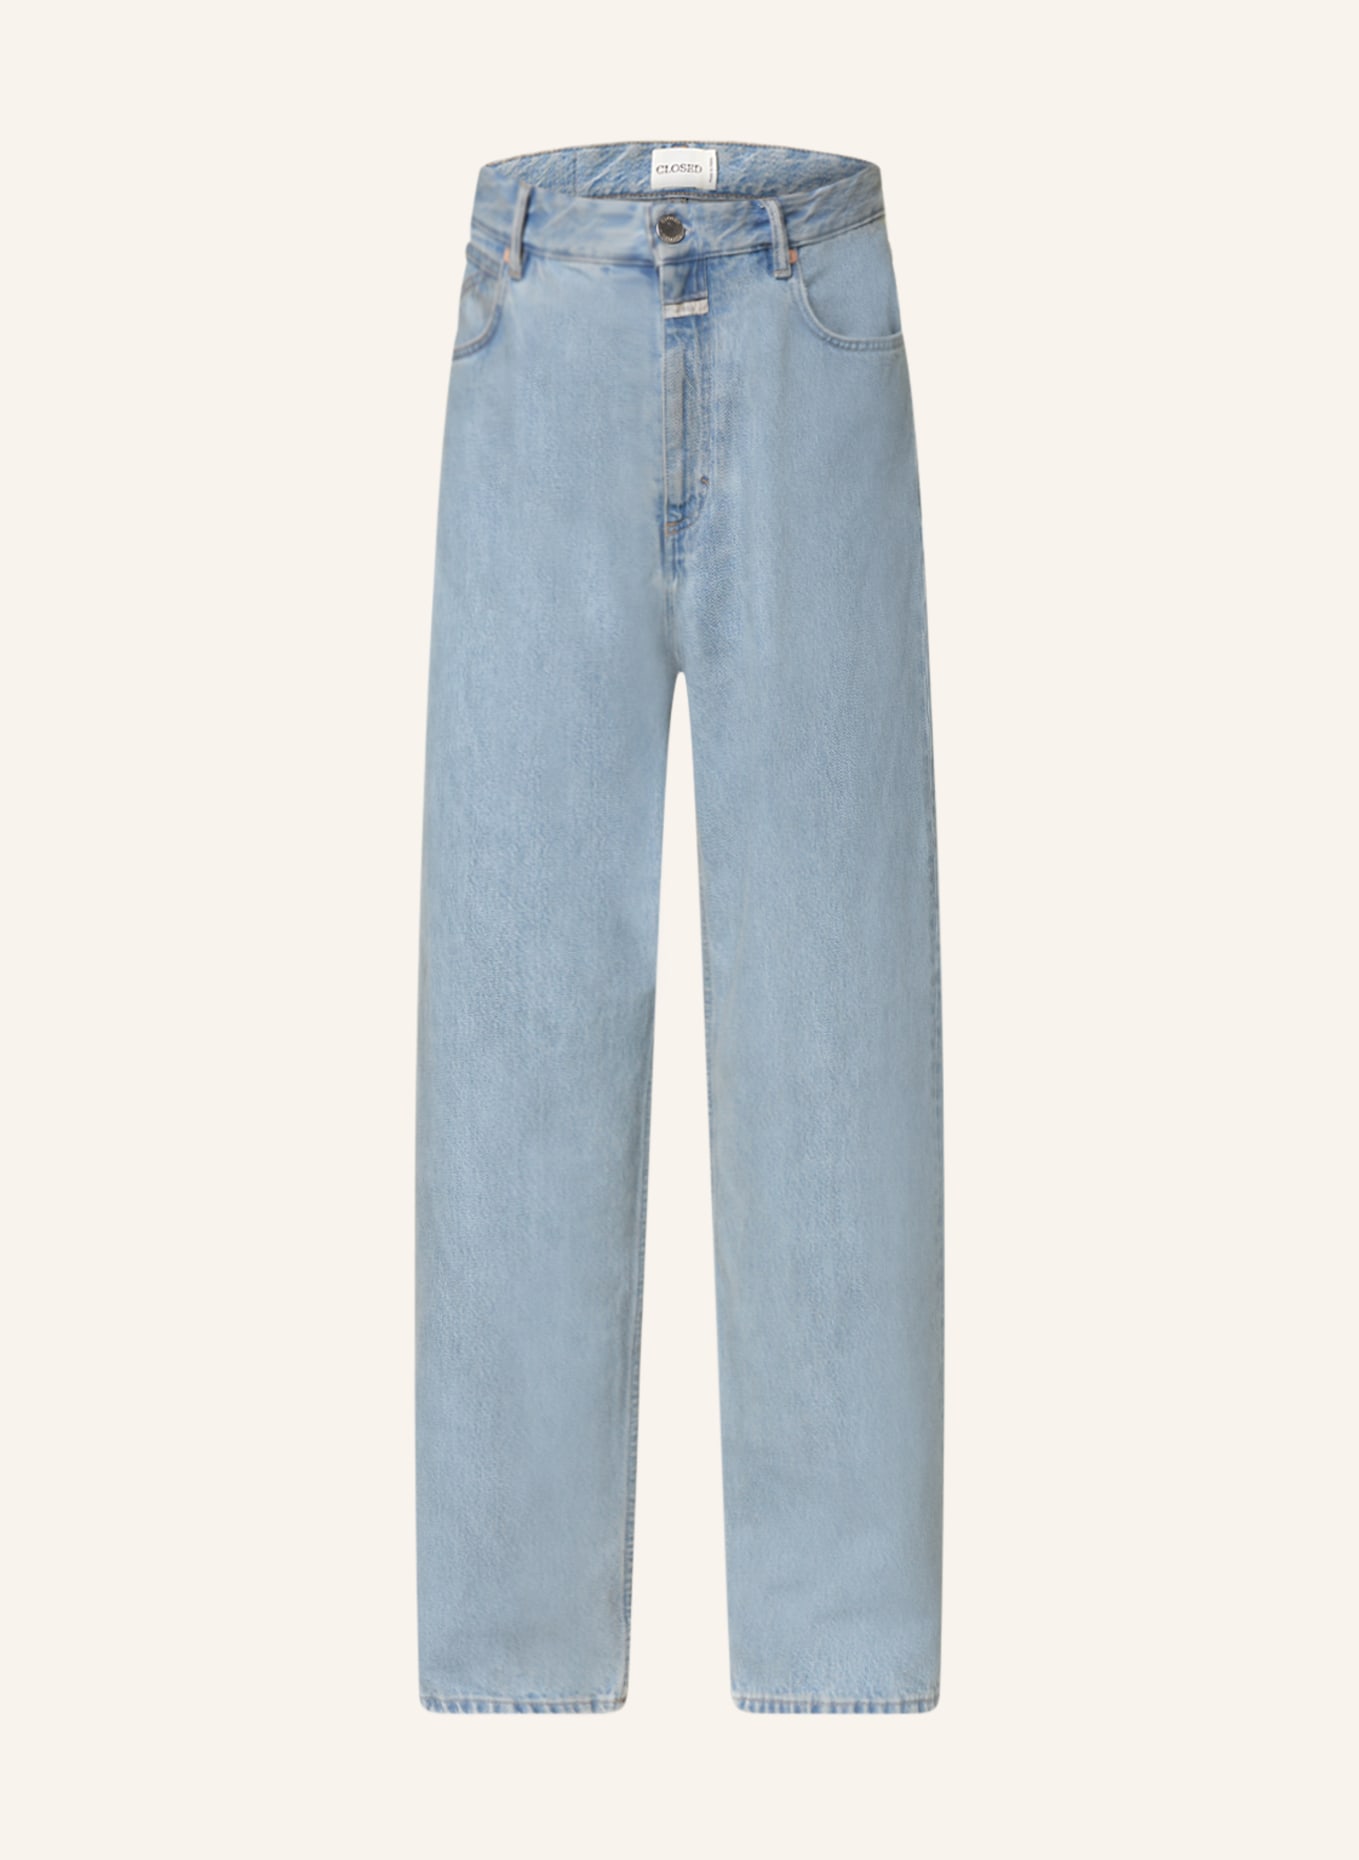 CLOSED Jeans SPRINGDALE Relaxed Fit, Farbe: MBL MID BLUE (Bild 1)